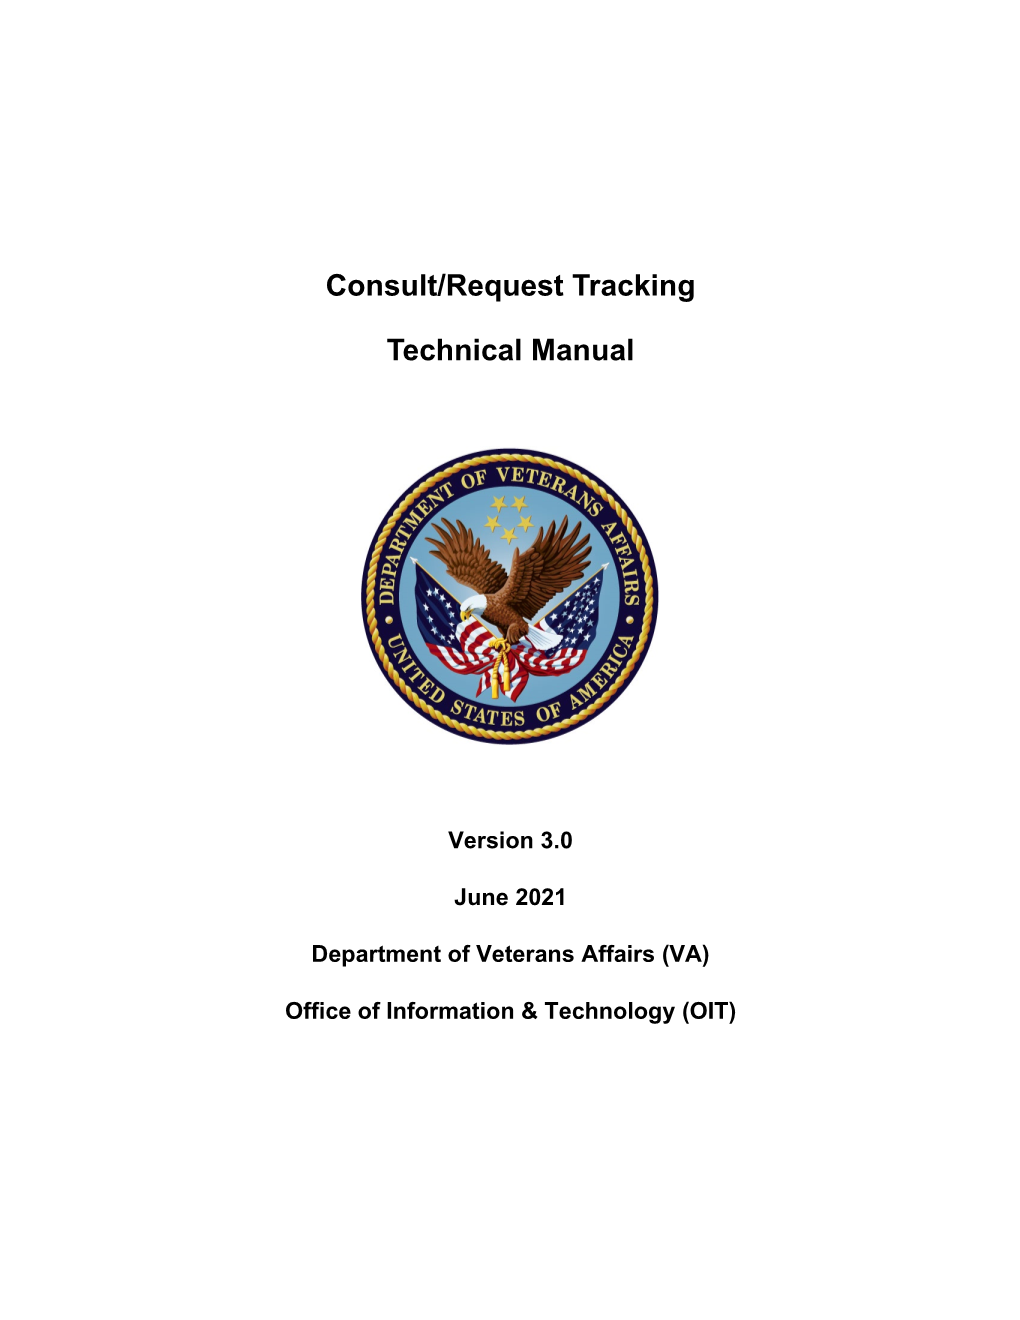 Consult/Request Tracking 3.0 Technical Manual Iii